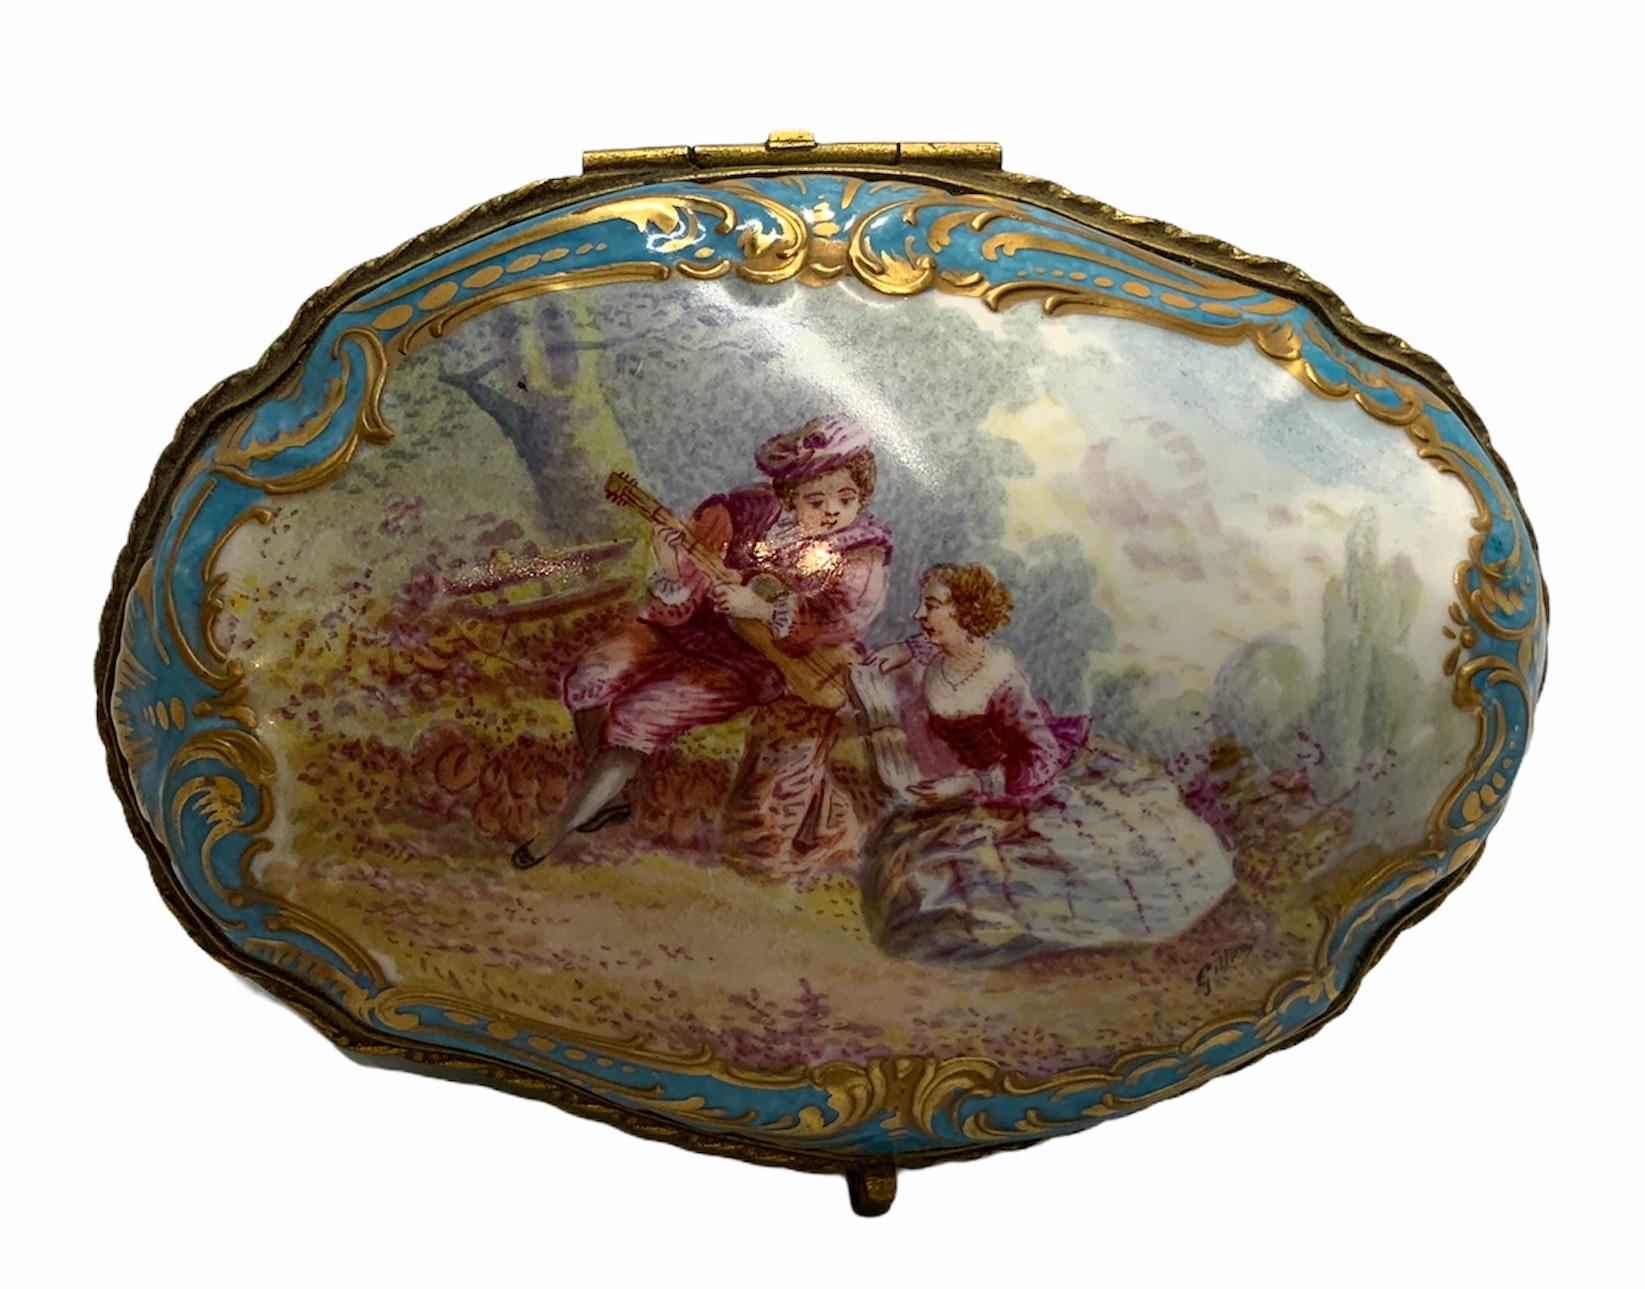 This a porcelain trinket box hinged lid depicting a hand painted 18th century pastoral scene of a young boy learning to play a guitar while his teacher is teaching him the musical notes. The scene is framed with gilt scrolls over a turquoise